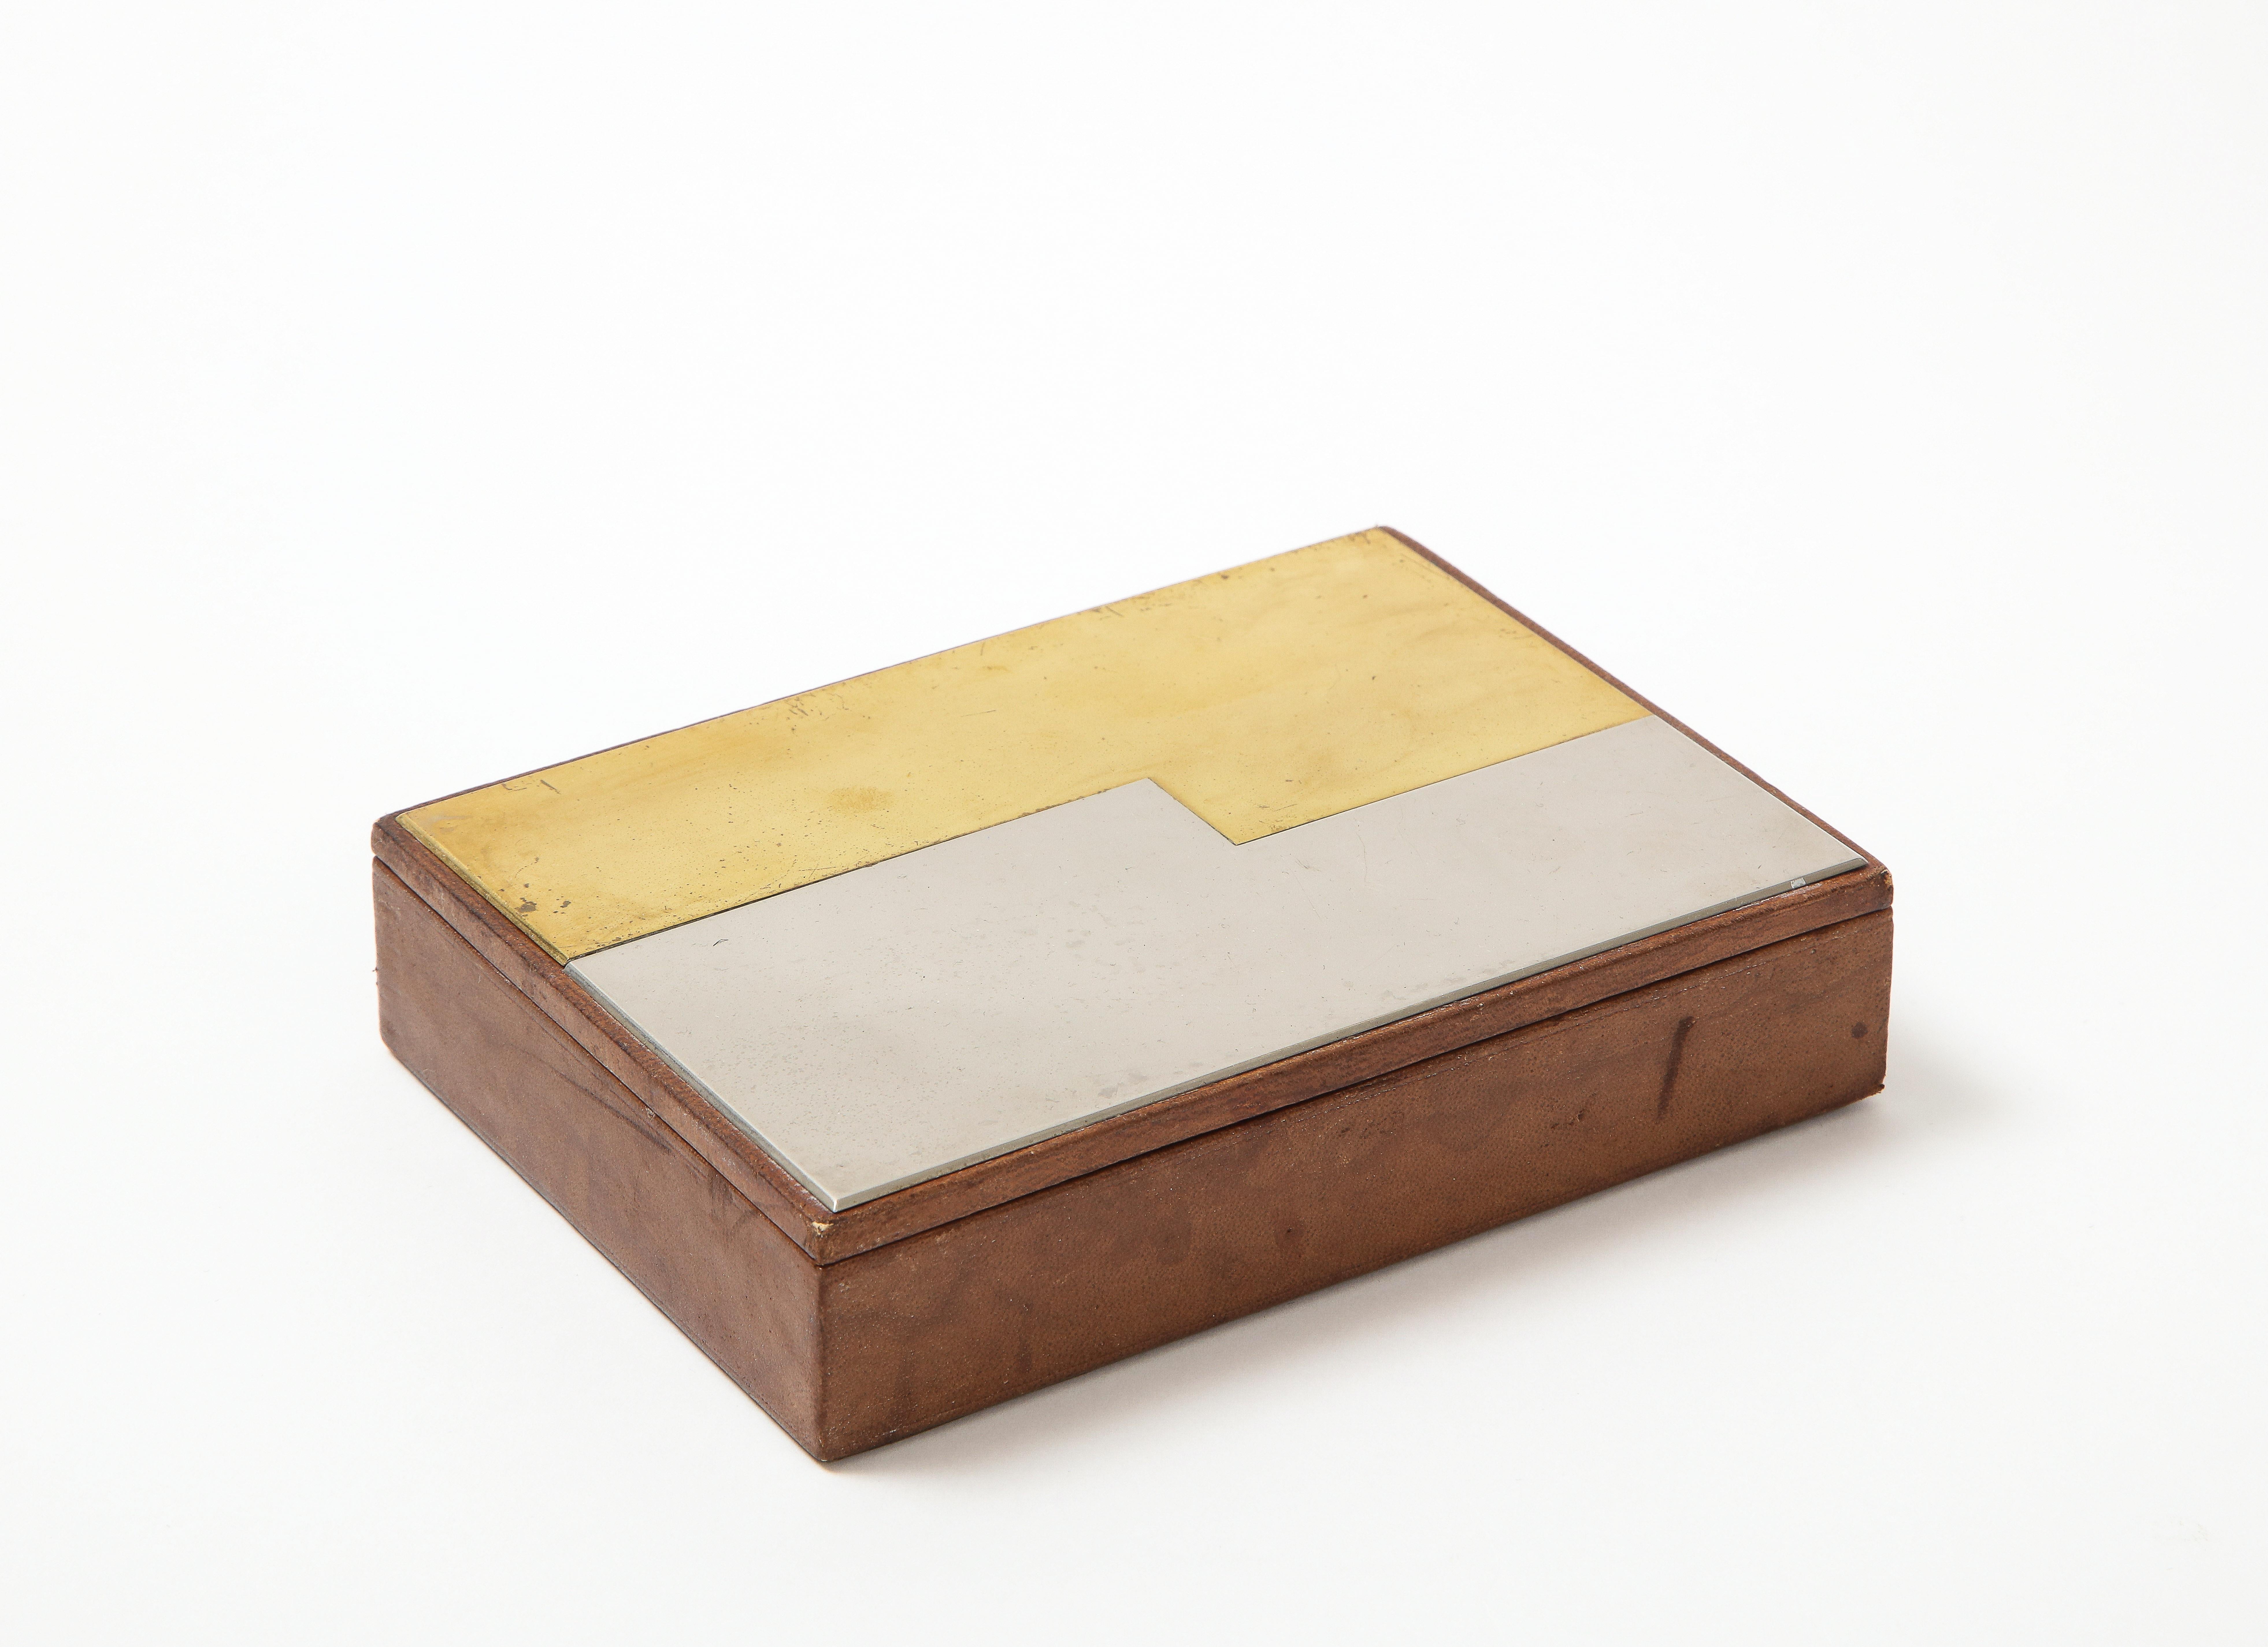 Elegant Brass Stainless Steel and Leather Box, France, 1970's